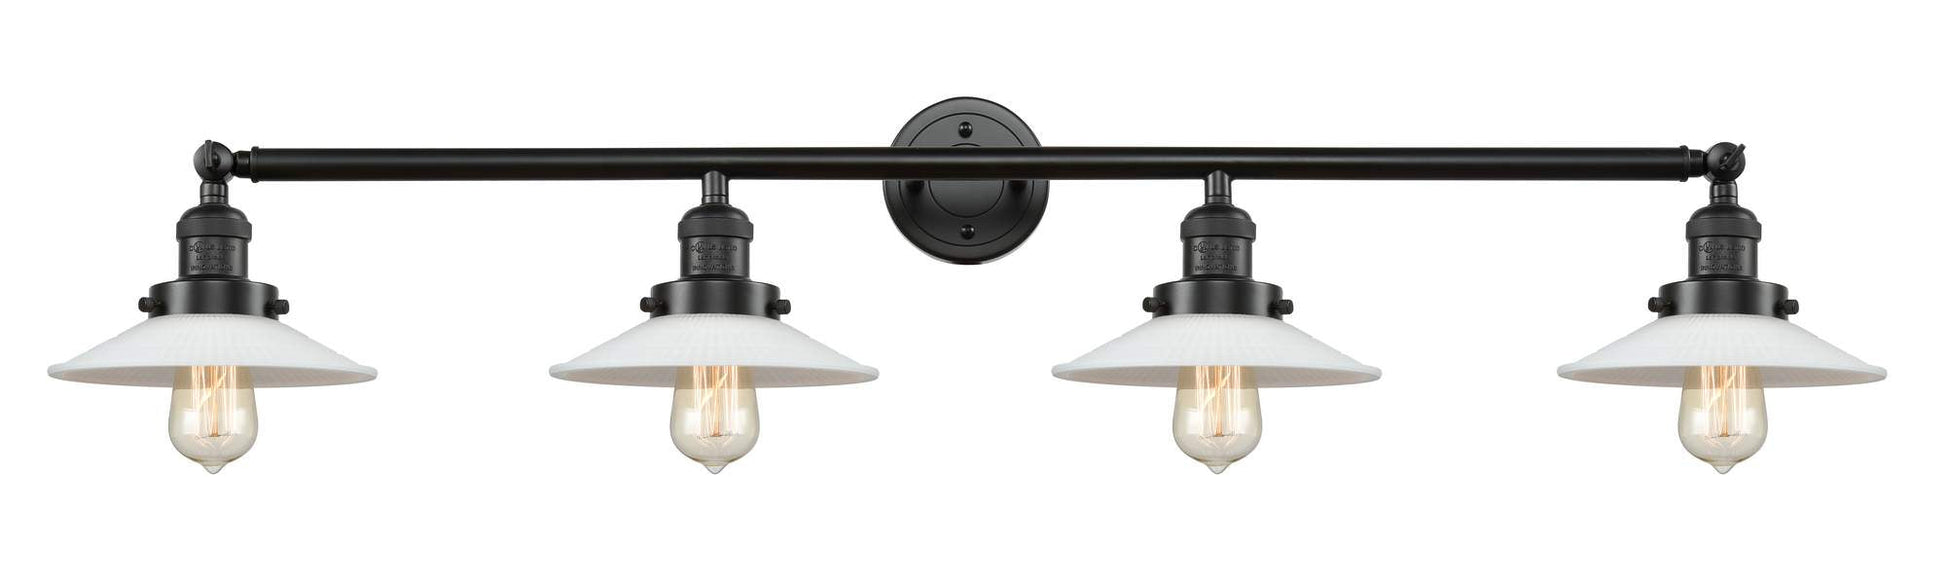 215-OB-G1 4-Light 44.5" Oil Rubbed Bronze Bath Vanity Light - White Halophane Glass - LED Bulb - Dimmensions: 44.5 x 9 x 6.5 - Glass Up or Down: Yes